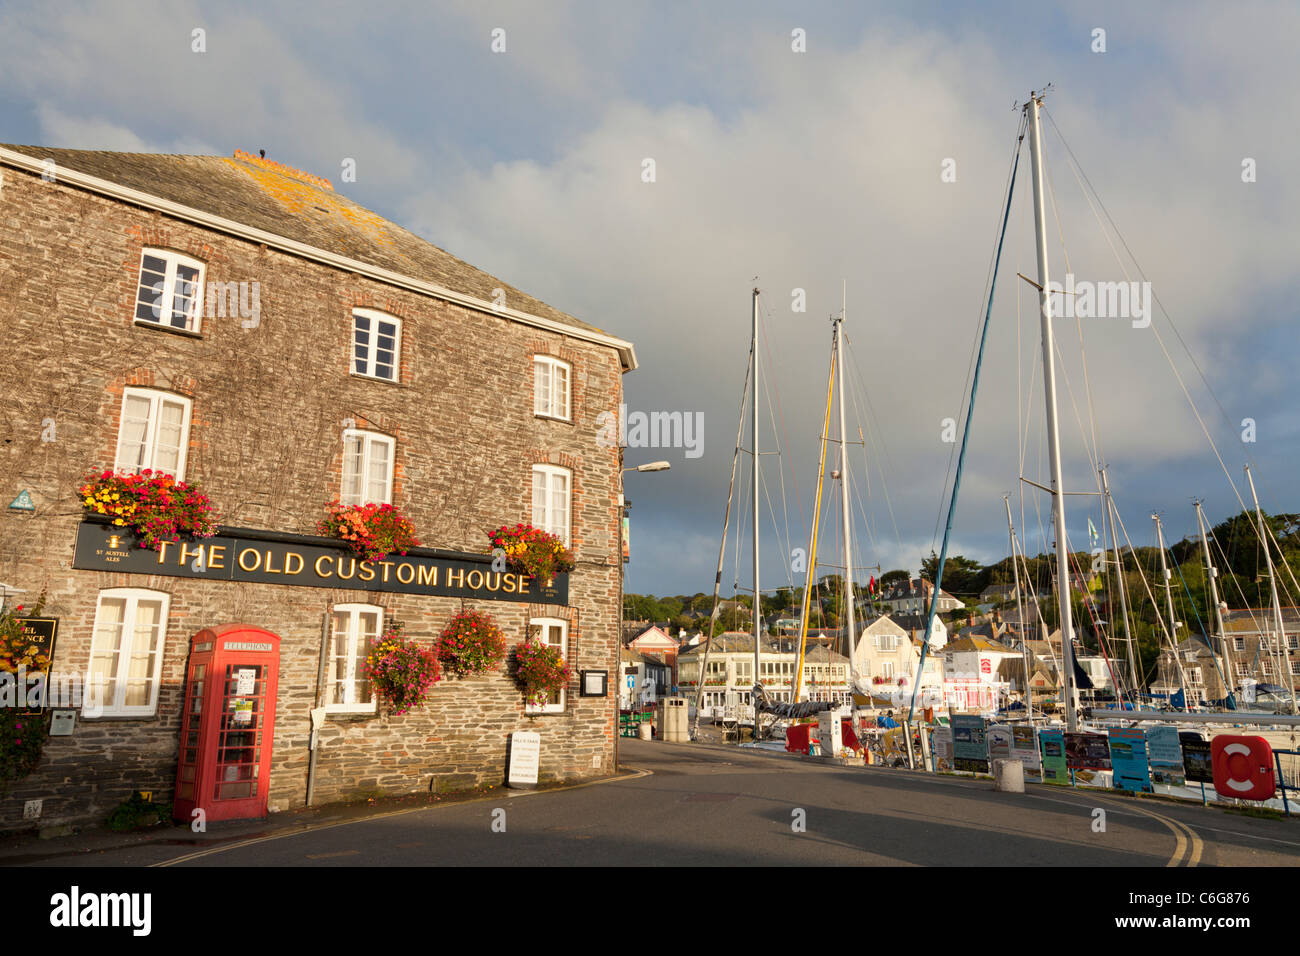 The old custom house public house and hotel Padstow village harbour Cornwall England UK GB EU Europe Stock Photo